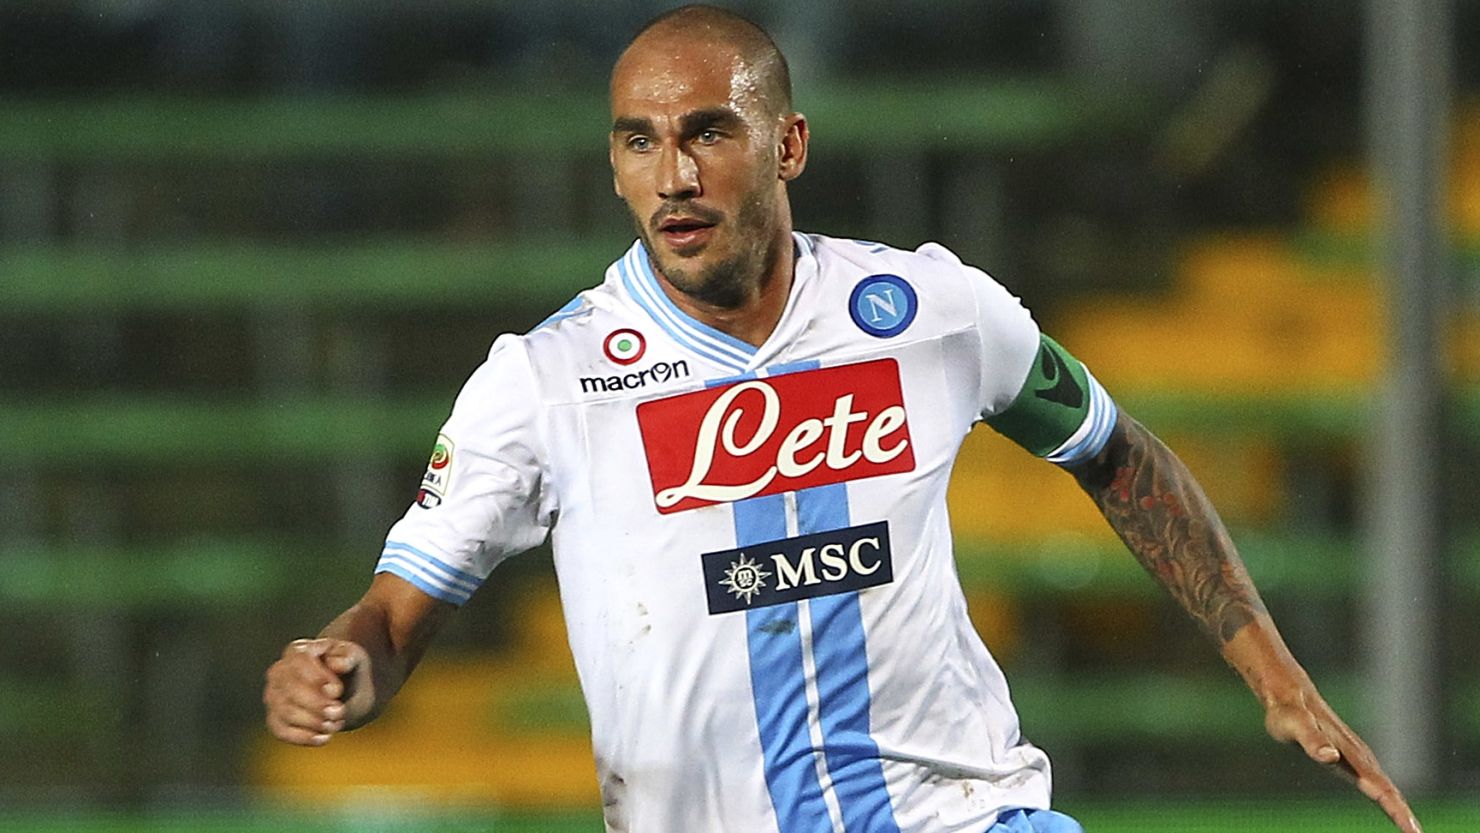 Napoli captain Paolo Cannavaro has played for the club since 2006.